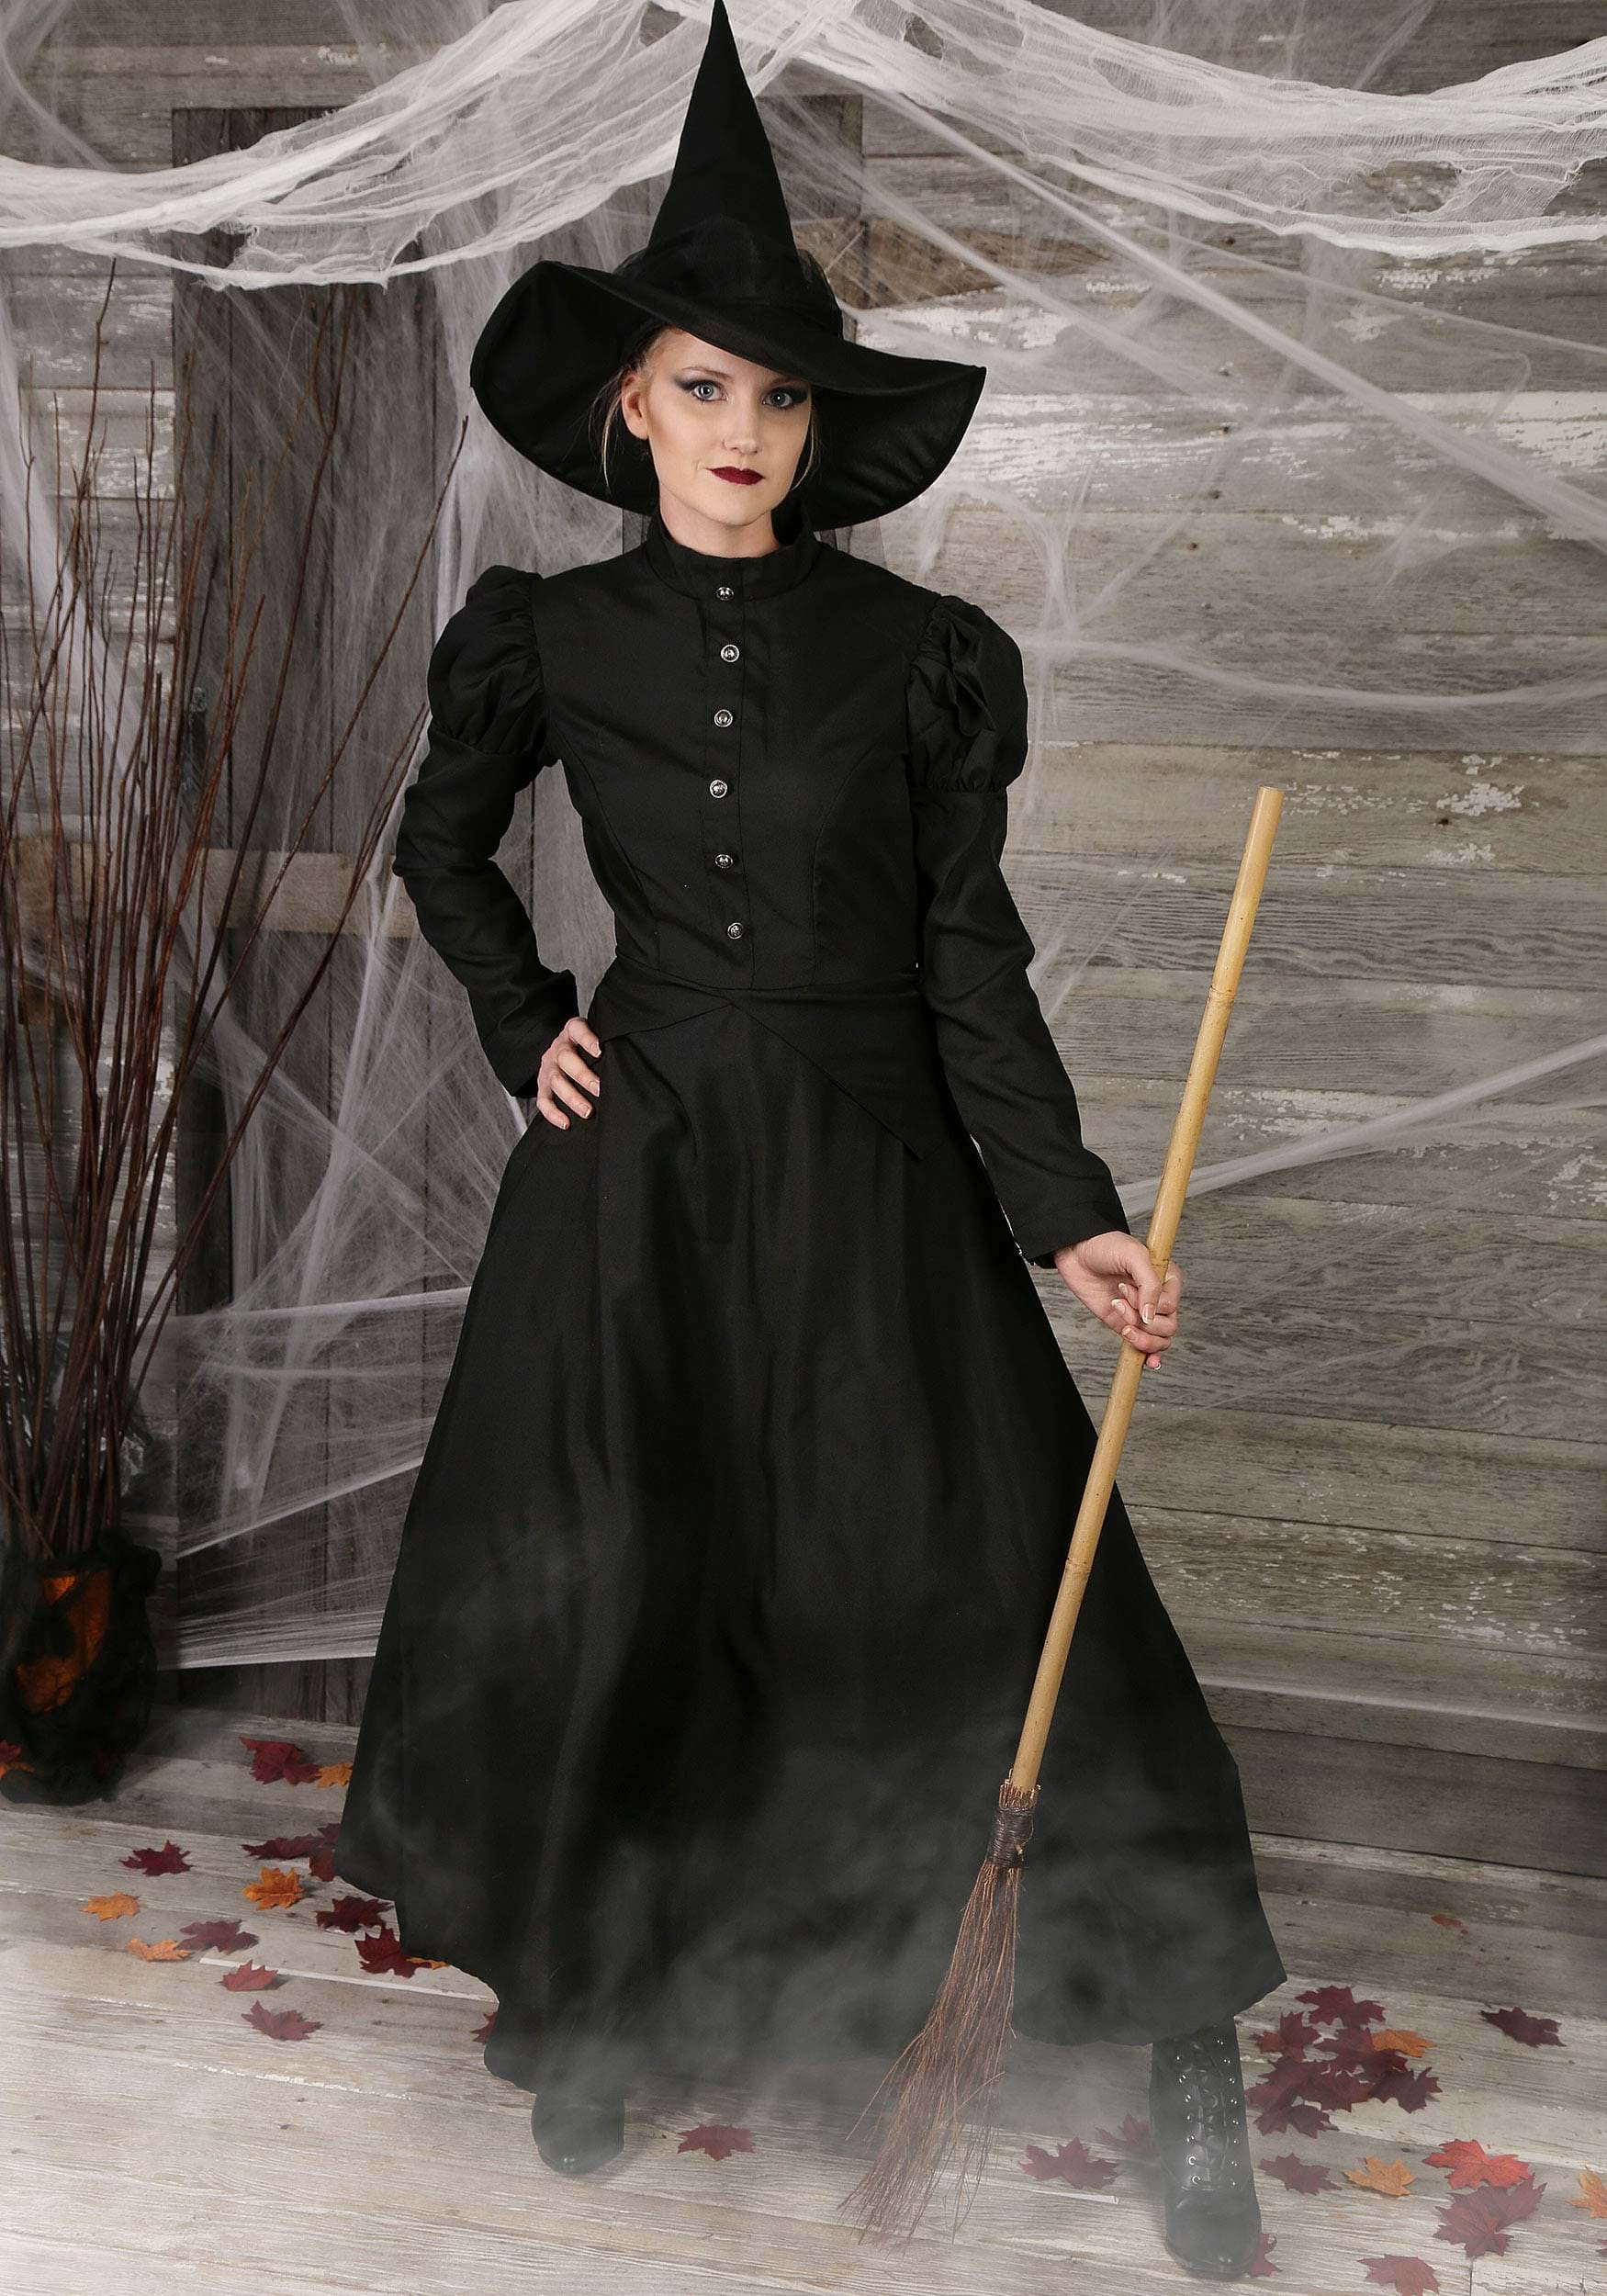 Women's Deluxe Witch Costume, Wicked Witch Costume